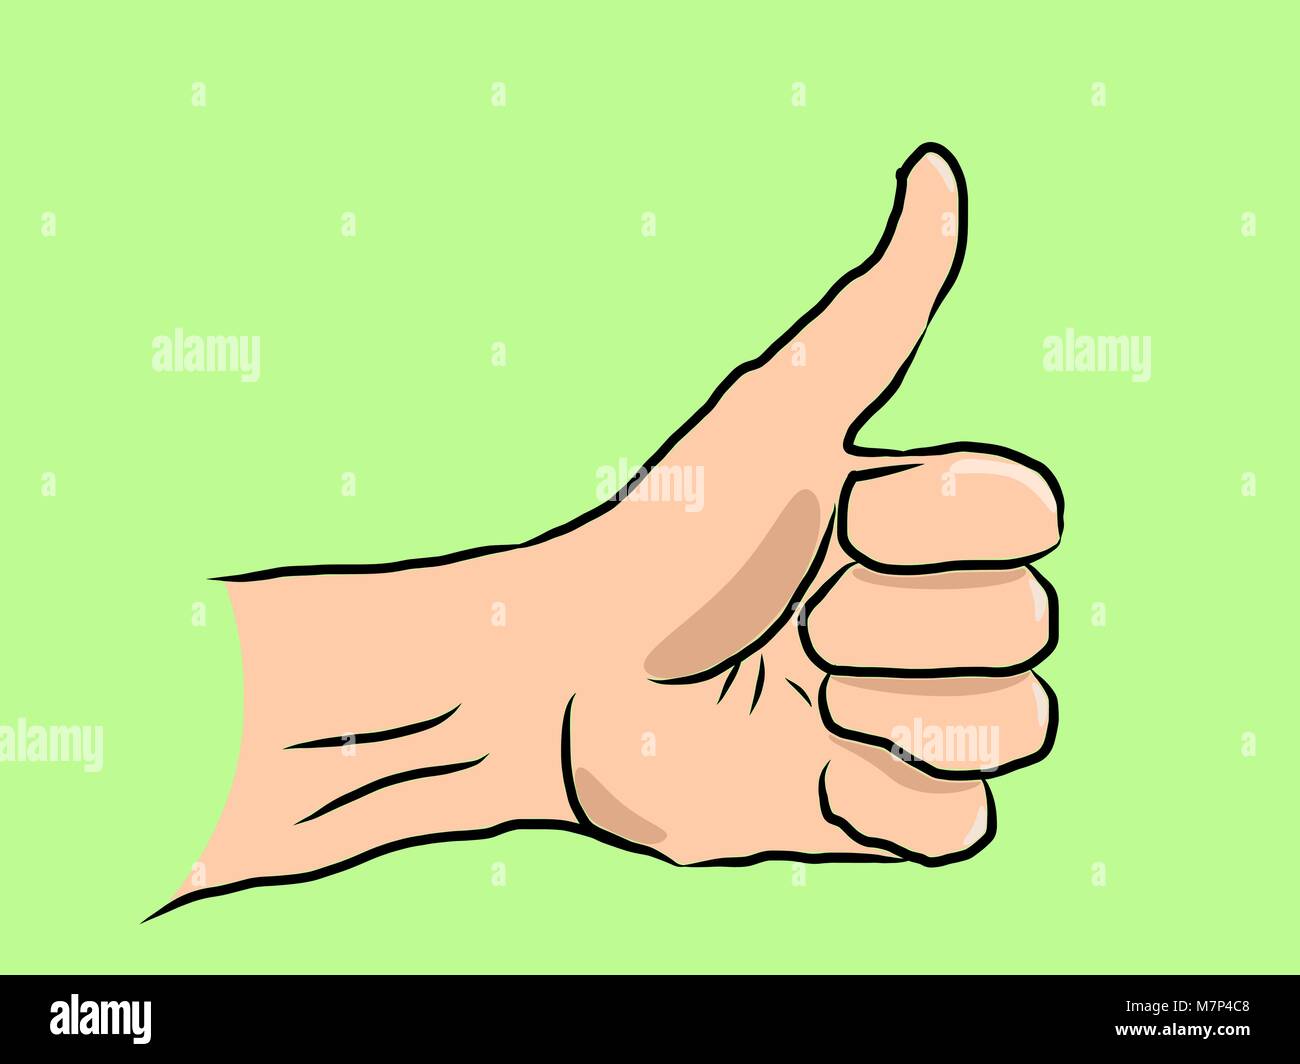 Hand drawn thumb up on a green background, positive symbol line drawing Stock Vector